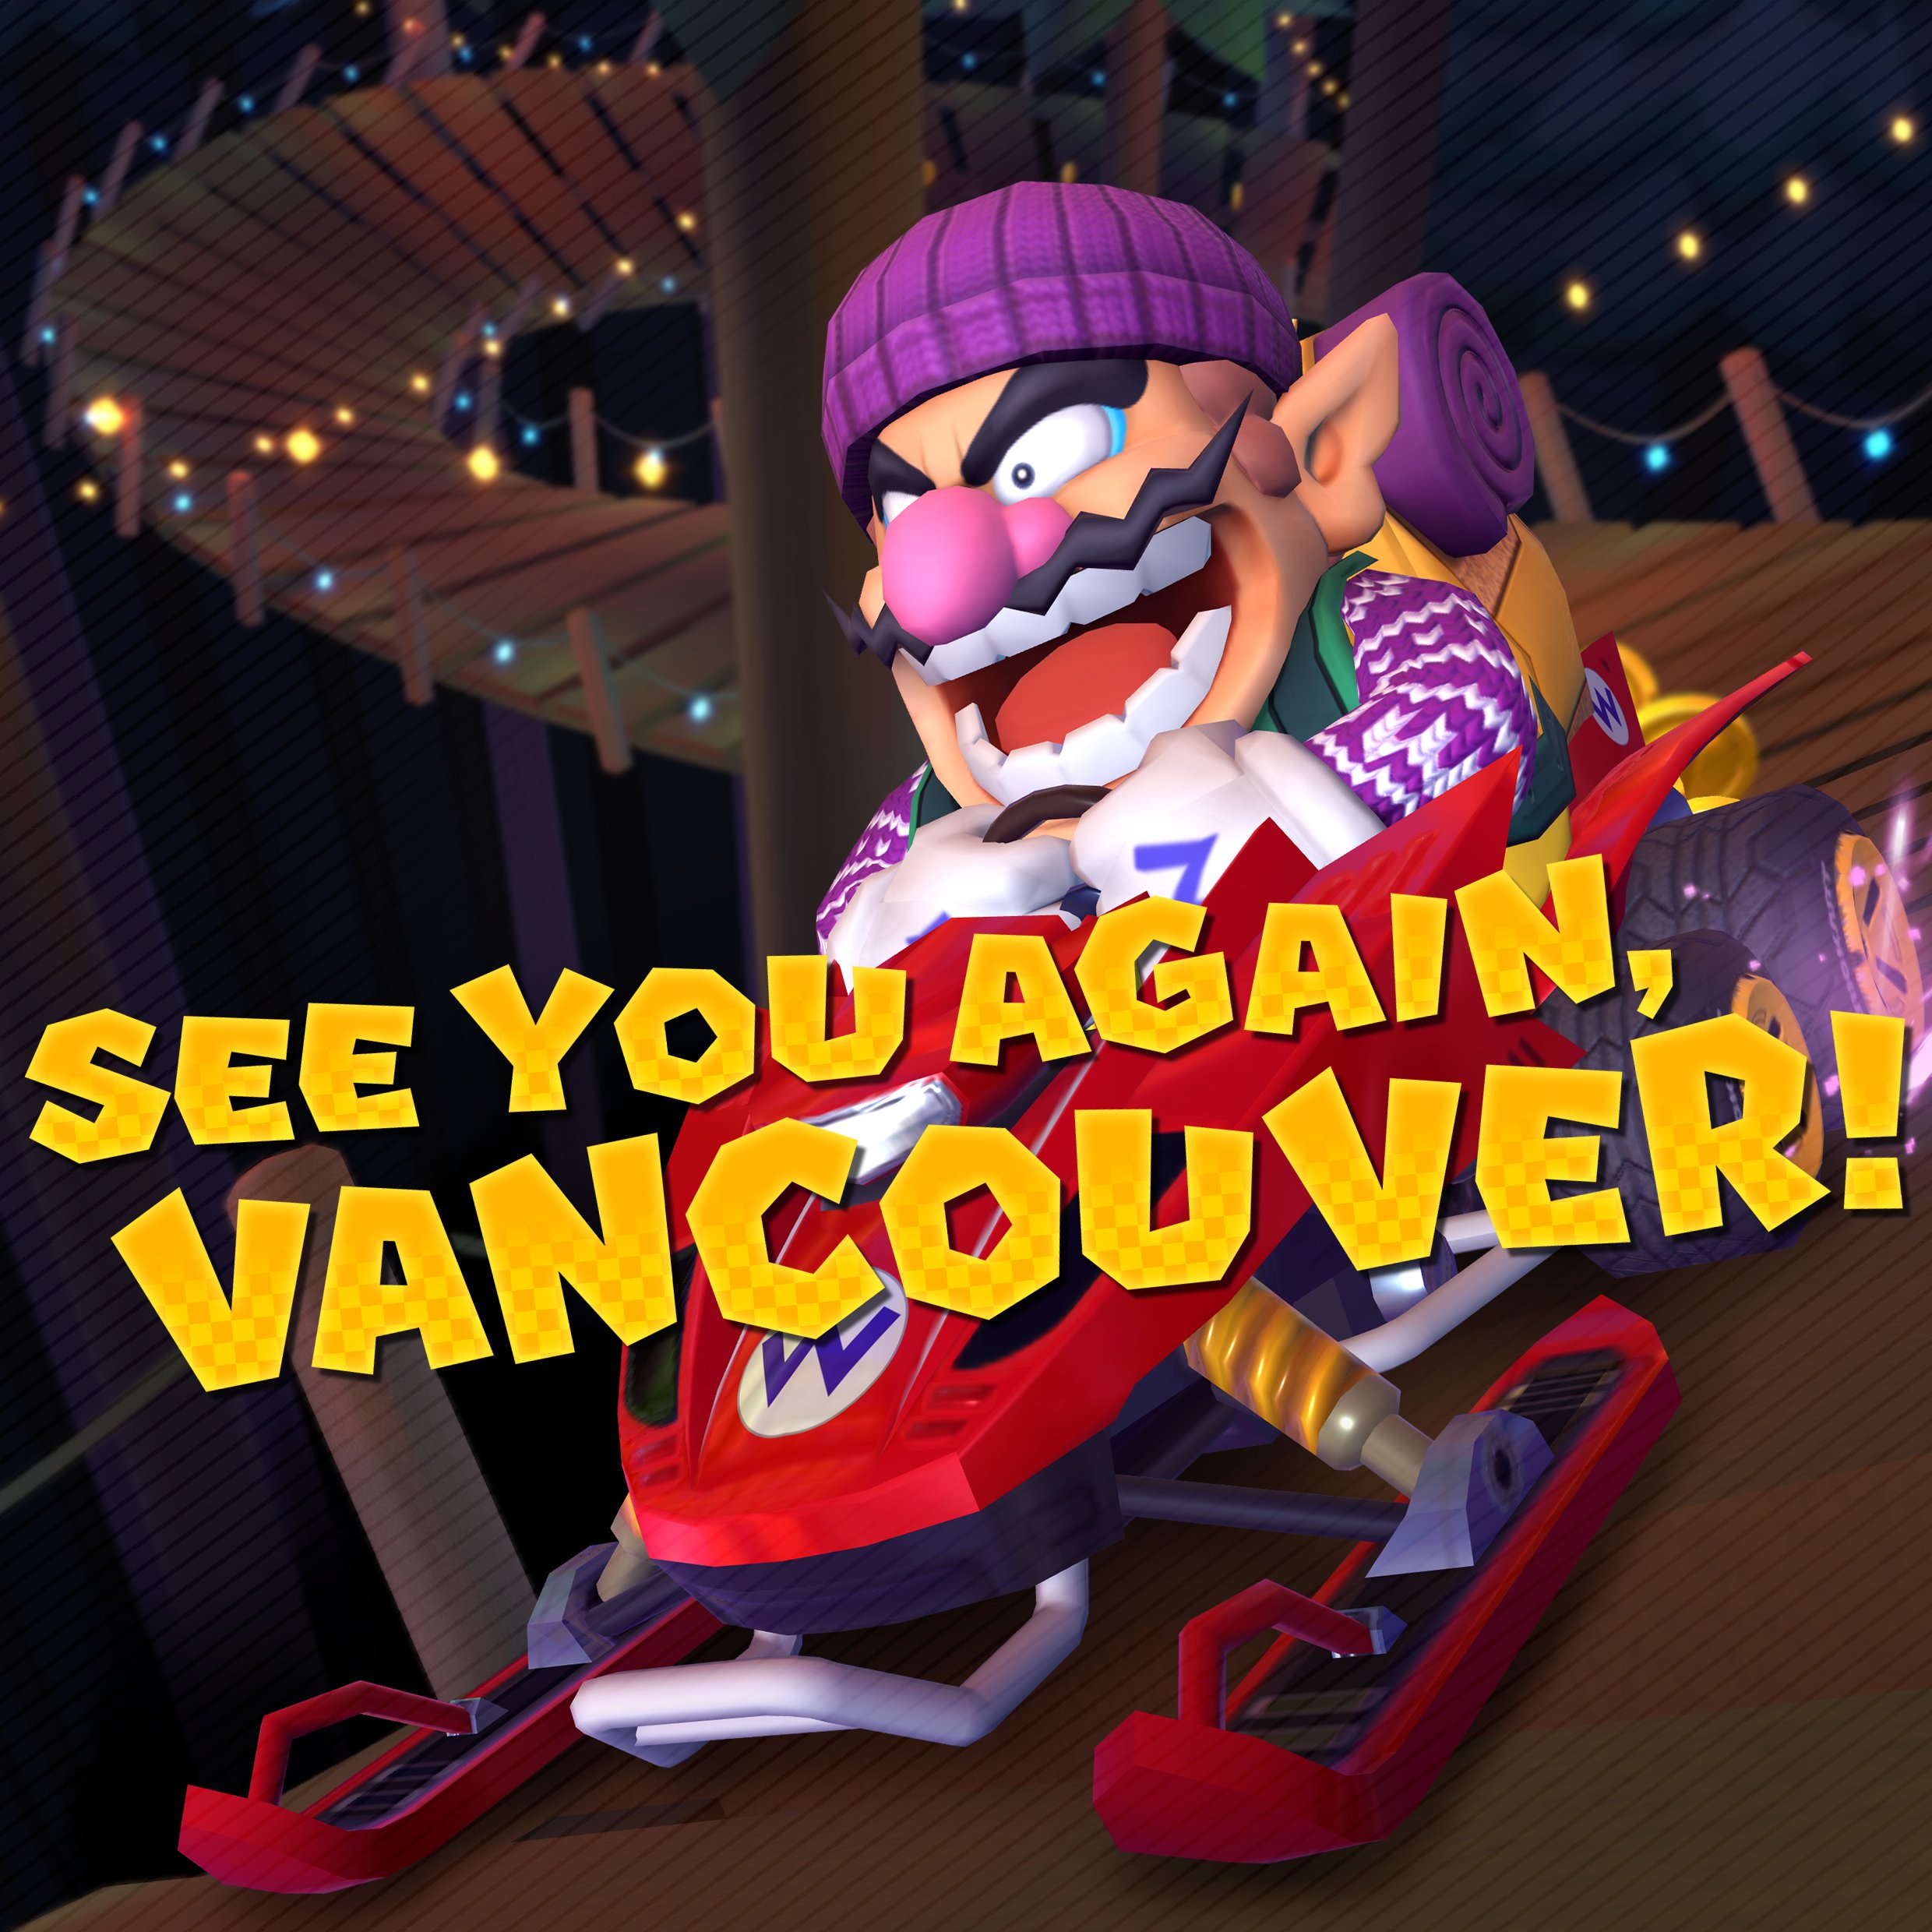 Mario Kart Tour on X: The Vancouver Tour is almost over. Thanks for  racing! Next up in #MarioKartTour: It wouldn't be Mario Kart without this  special pair of brothers. The Mario Bros.